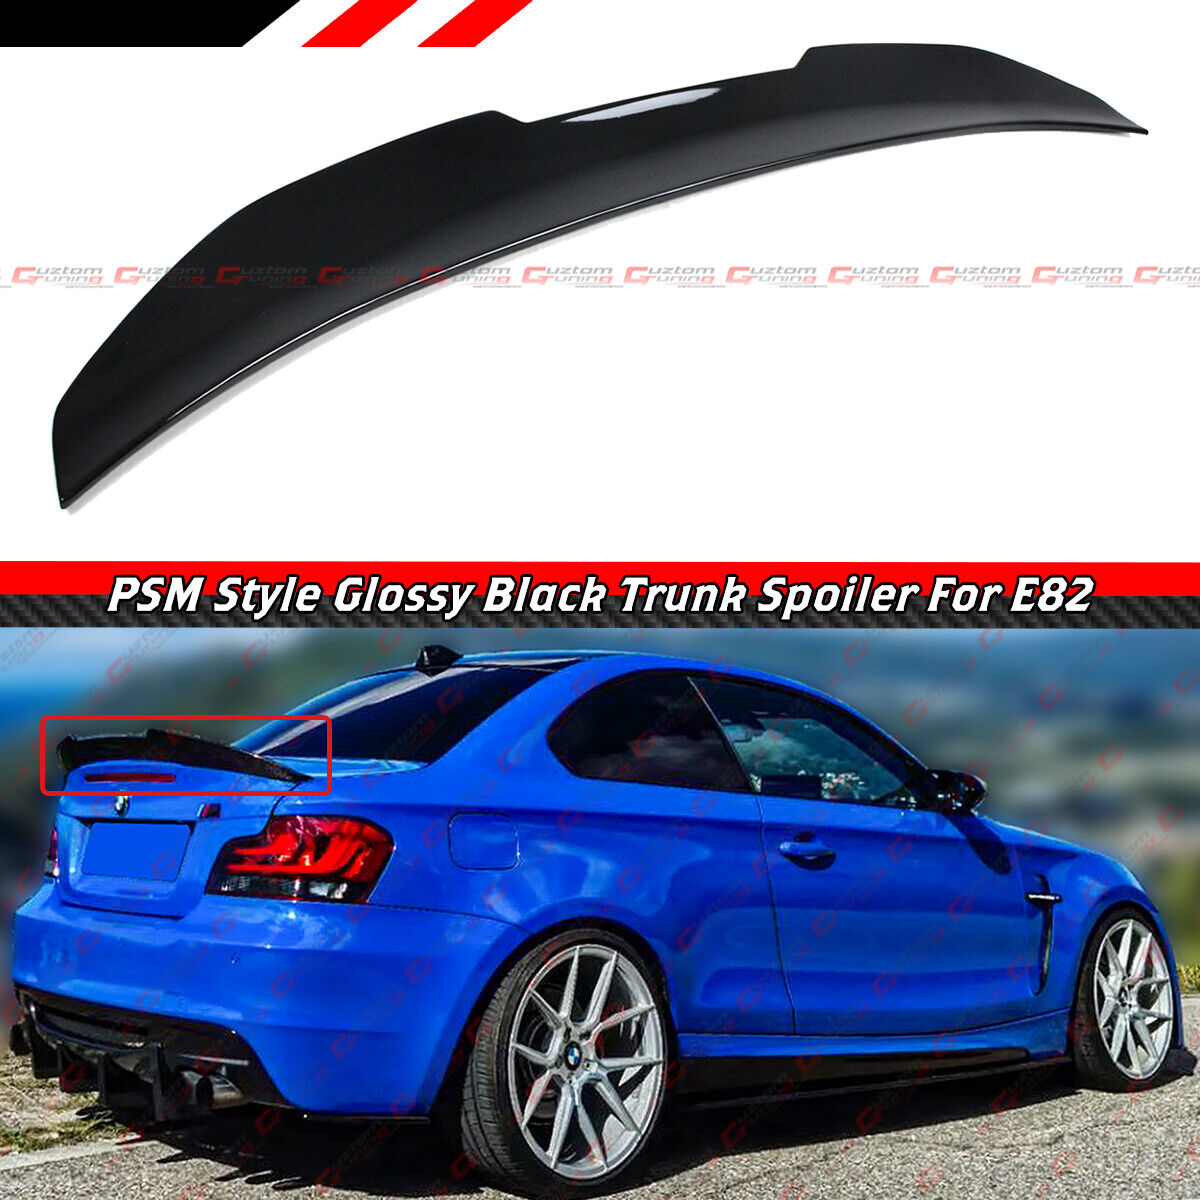 FOR 2007-2013 BMW E82 1 SERIES COUPE PSM STYLE GLOSSY BLACK TRUNK SPOILER WING